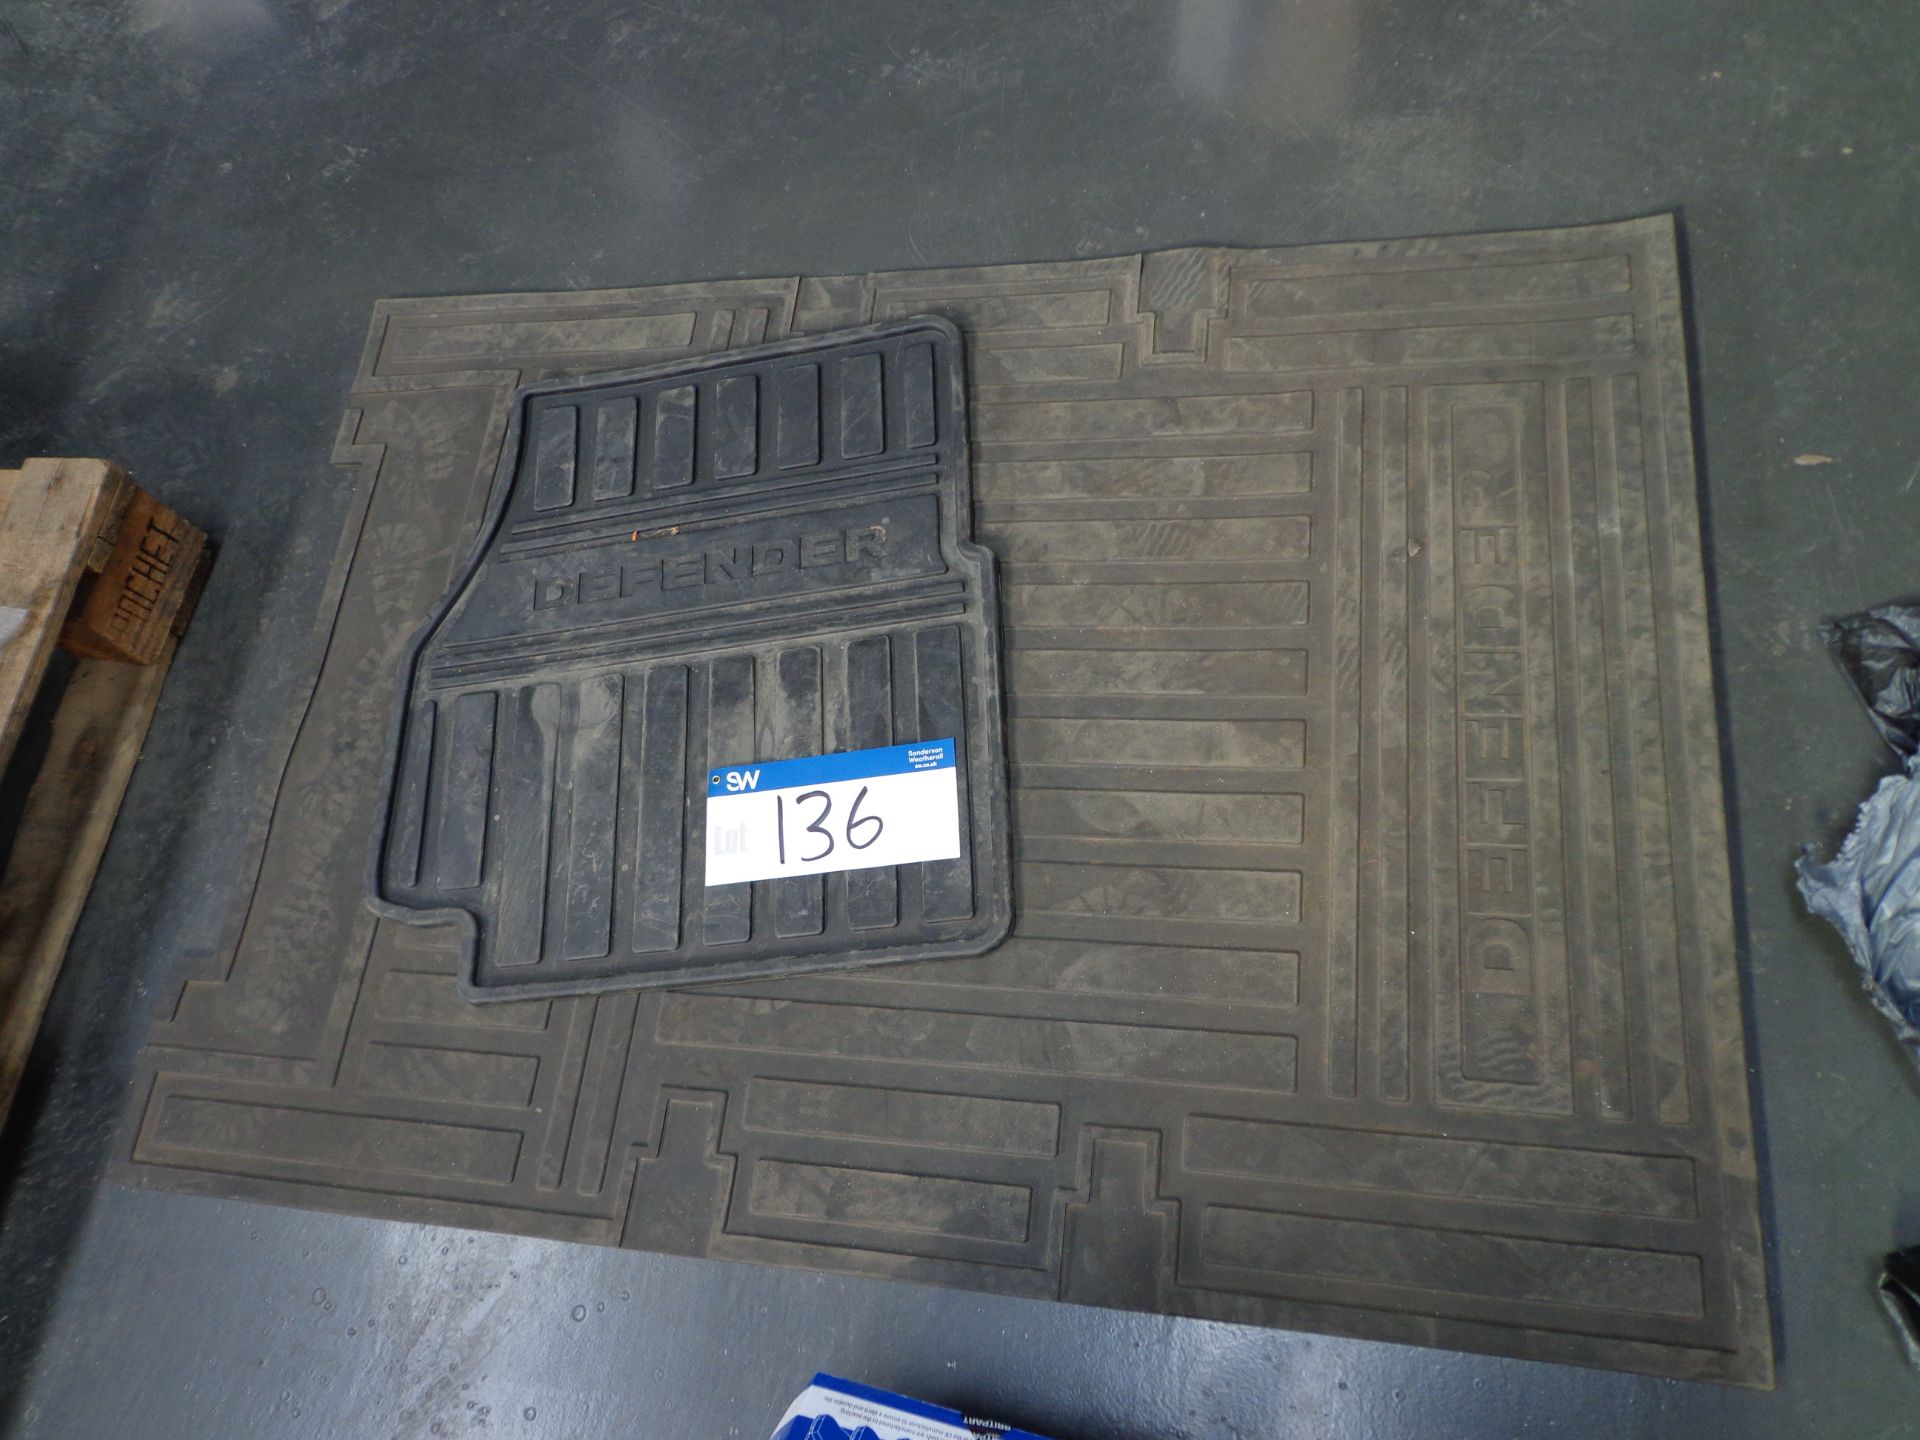 2 Rubber Floor MatsPlease read the following important notes:- ***Overseas buyers - All lots are